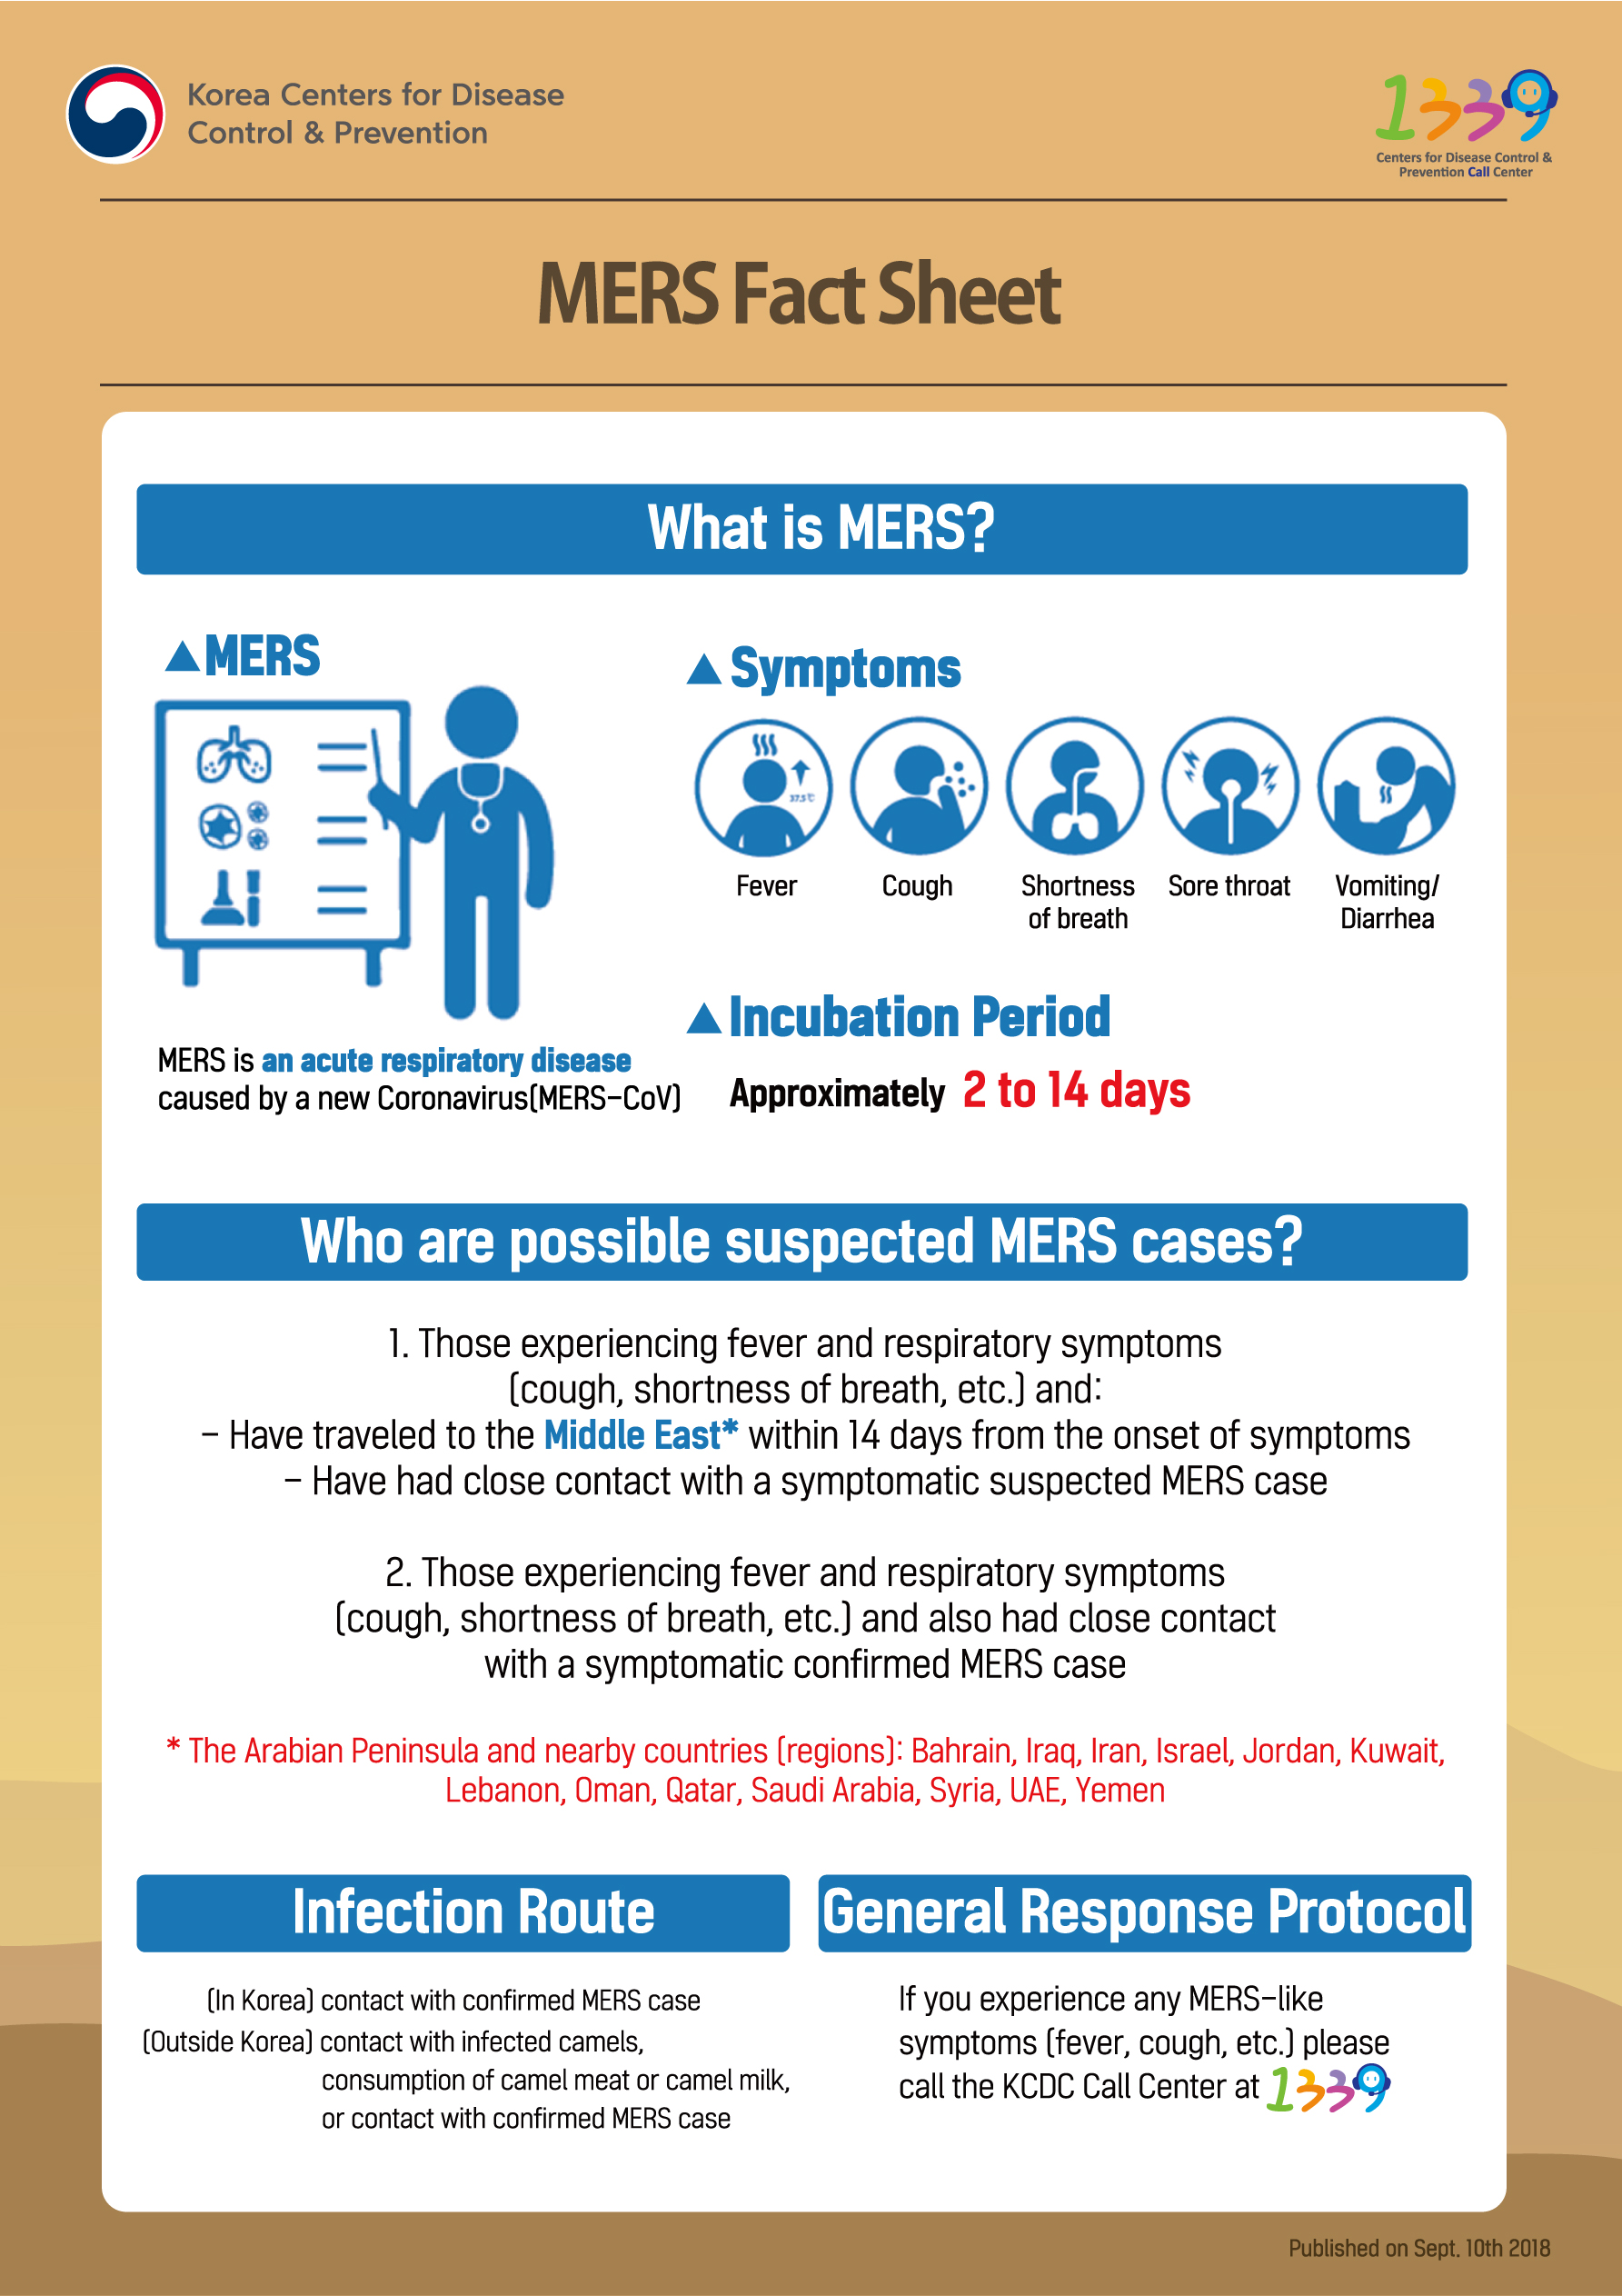 Korea Center for Disease Control&Prevention. 1339 Center for Disease Control&Prevetion Call Center. [MERS Fact Sheet]
1.What is MERS?
▲MERS
MERS is an acute respiratory disease caused by a new Coronavirus(MERS-CoV)
▲Symptoms
Fever, Cough, Shortness of breath, Sore throat, Vomiting/Diarrhea
▲Incubation Period
Approximately 2 to 14 days
2.Who are possible suspected MERS cases?
1. Those experiencing fever and respiratory symptoms(cough, shortness of breath, etc.) and:
- Have traveled to the Middle East* within 14 days from the onset of symptoms
- Have had close contact with a symptomatic suspected MERS case
2. Those experiencing fever and respiratory symptoms(cough, shortness of breath, etc.) and also had close contact with a symptomatic confirmed MERS case
The Arabian Peninsula and nearby countries(regions): Bahrain, Iraq, Iran, Israel, Jordan, Kuwait, Lebanon, Oman, Qatar, Saudi Arabia, Syria, UAE, Yemen
3.Infection Route
(In Korea) contact with confirmed MERS case
(Outside Korea) contact with infected camels, consumption of camel meat or camel milk or contact with confirmed MERS case
4.General Response Protocol
If you experience any MERS-like symptoms(fever, cough, etc.) please call the KCDC Call Center at 1339
Published on Sept. 10th 2018
